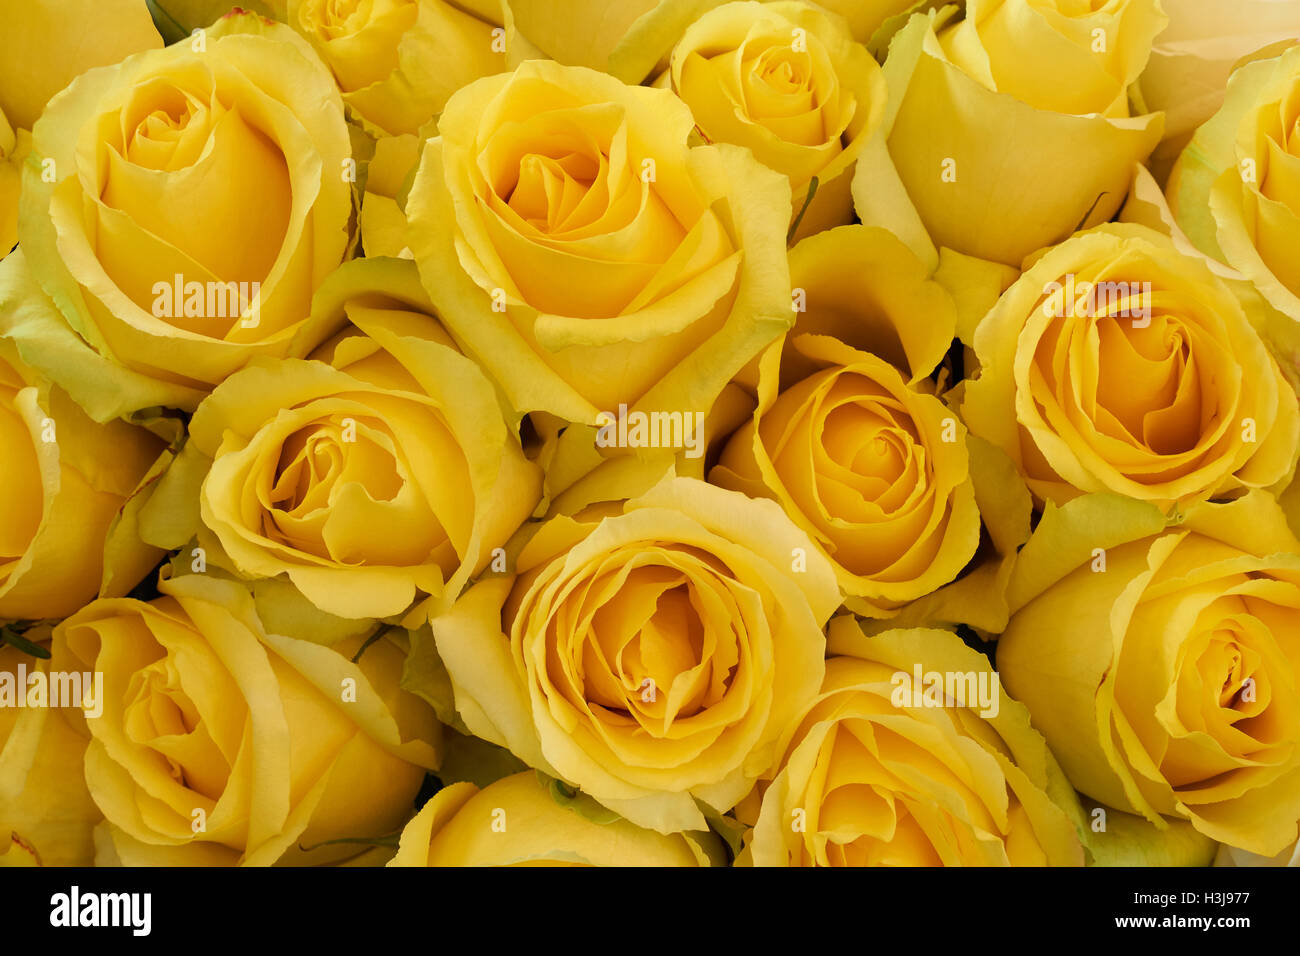 Bunch of beautiful yellow roses as floral background Stock Photo